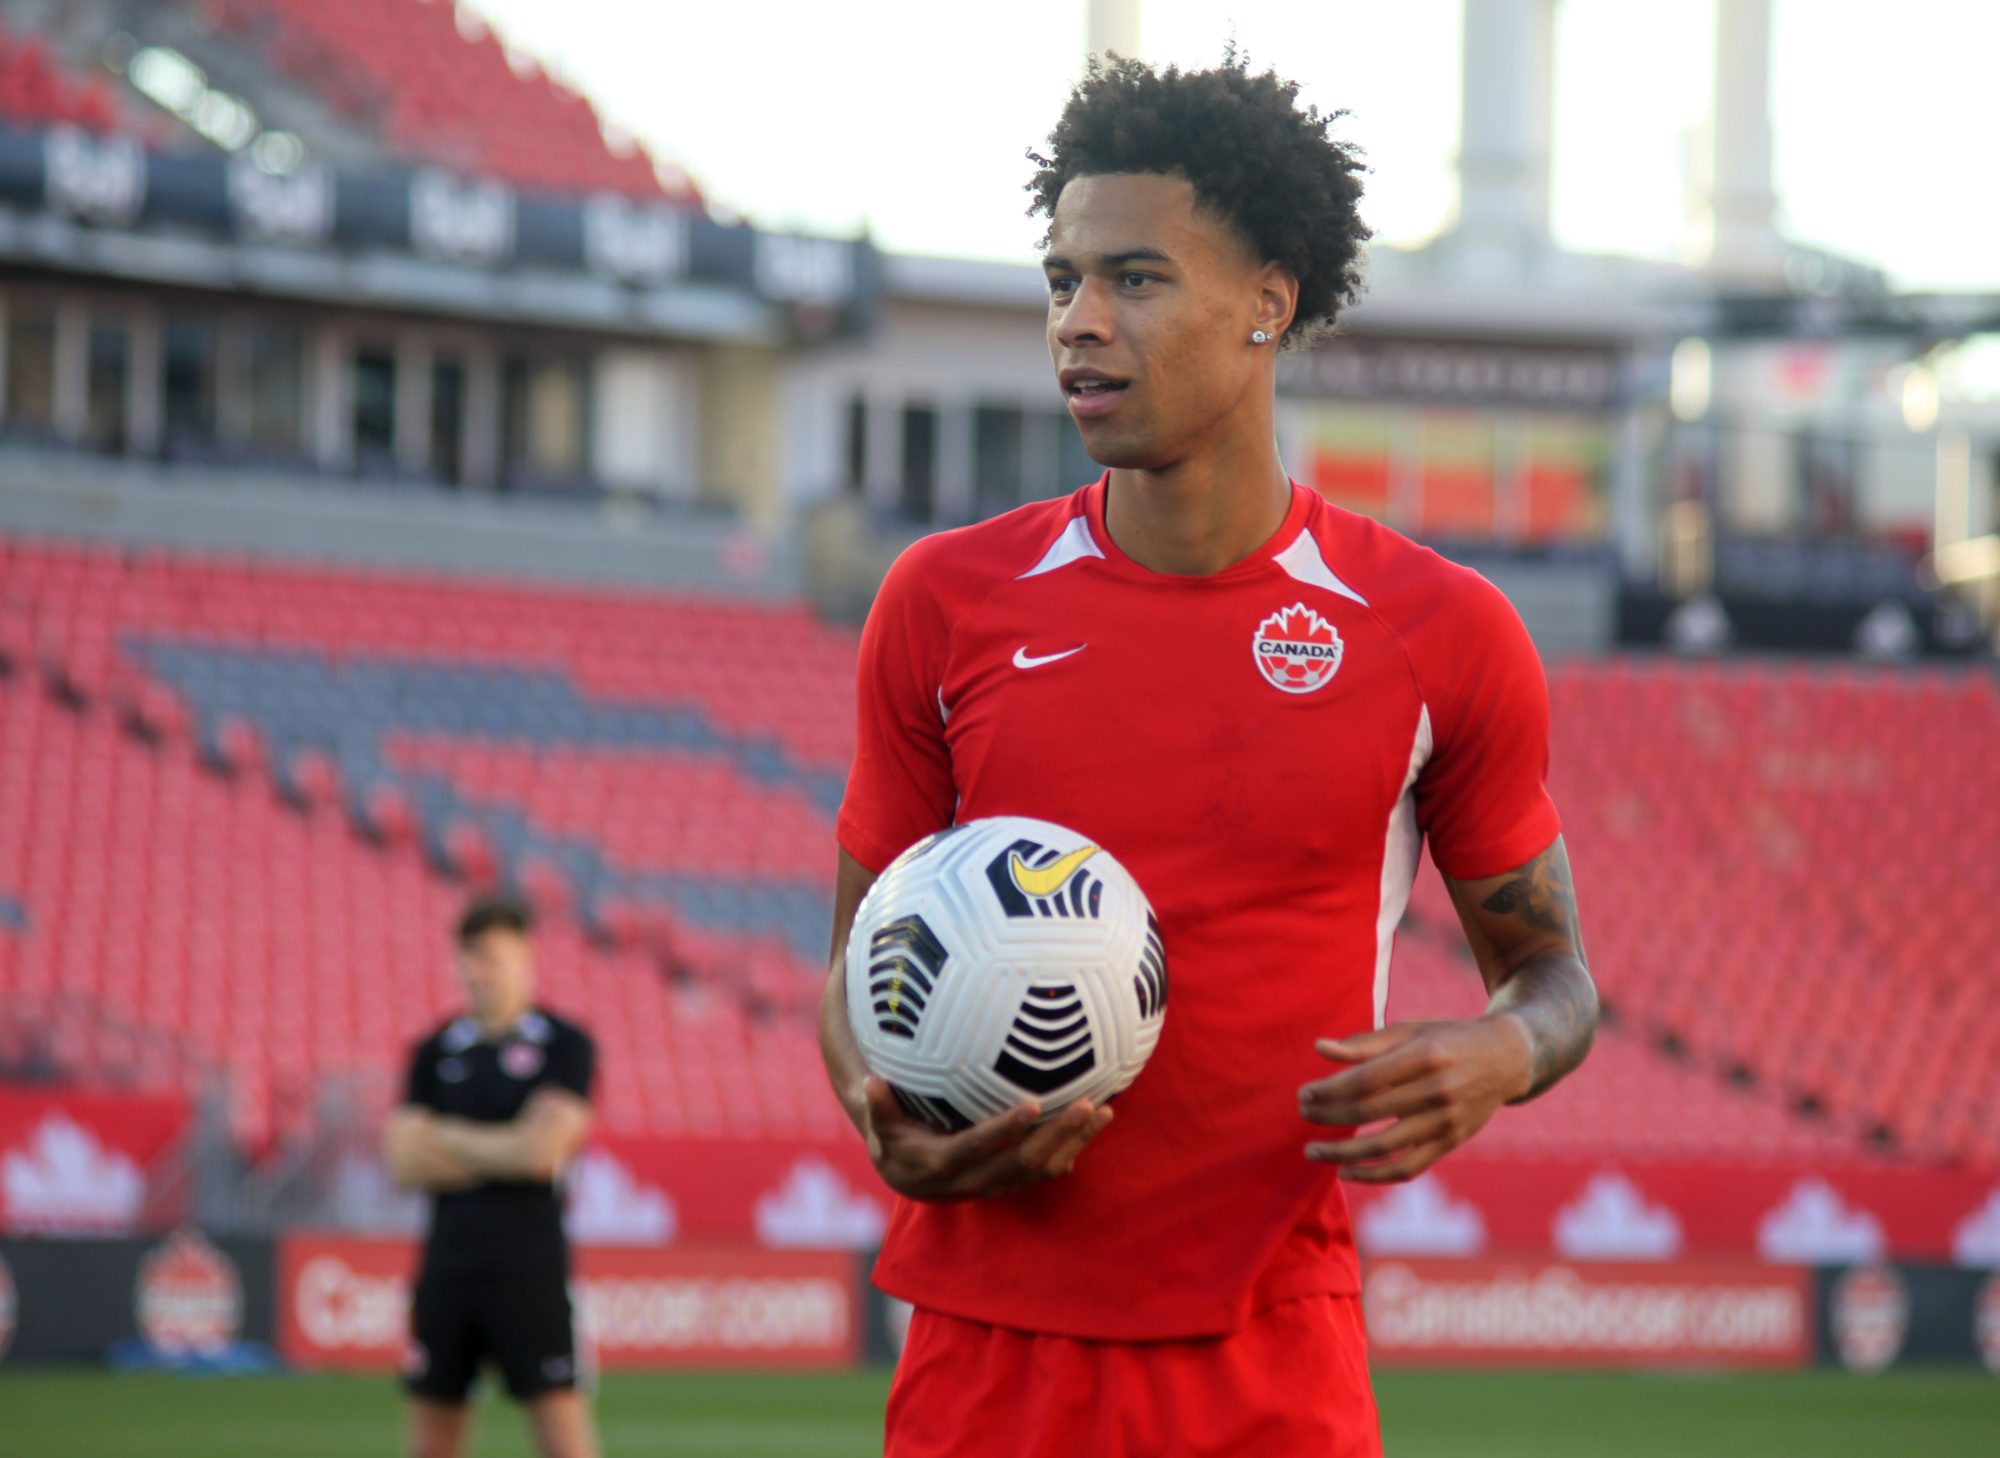 Tajon Buchanan in a red jersey holding a soccer ball against the backdrop of a stadium with red seats.